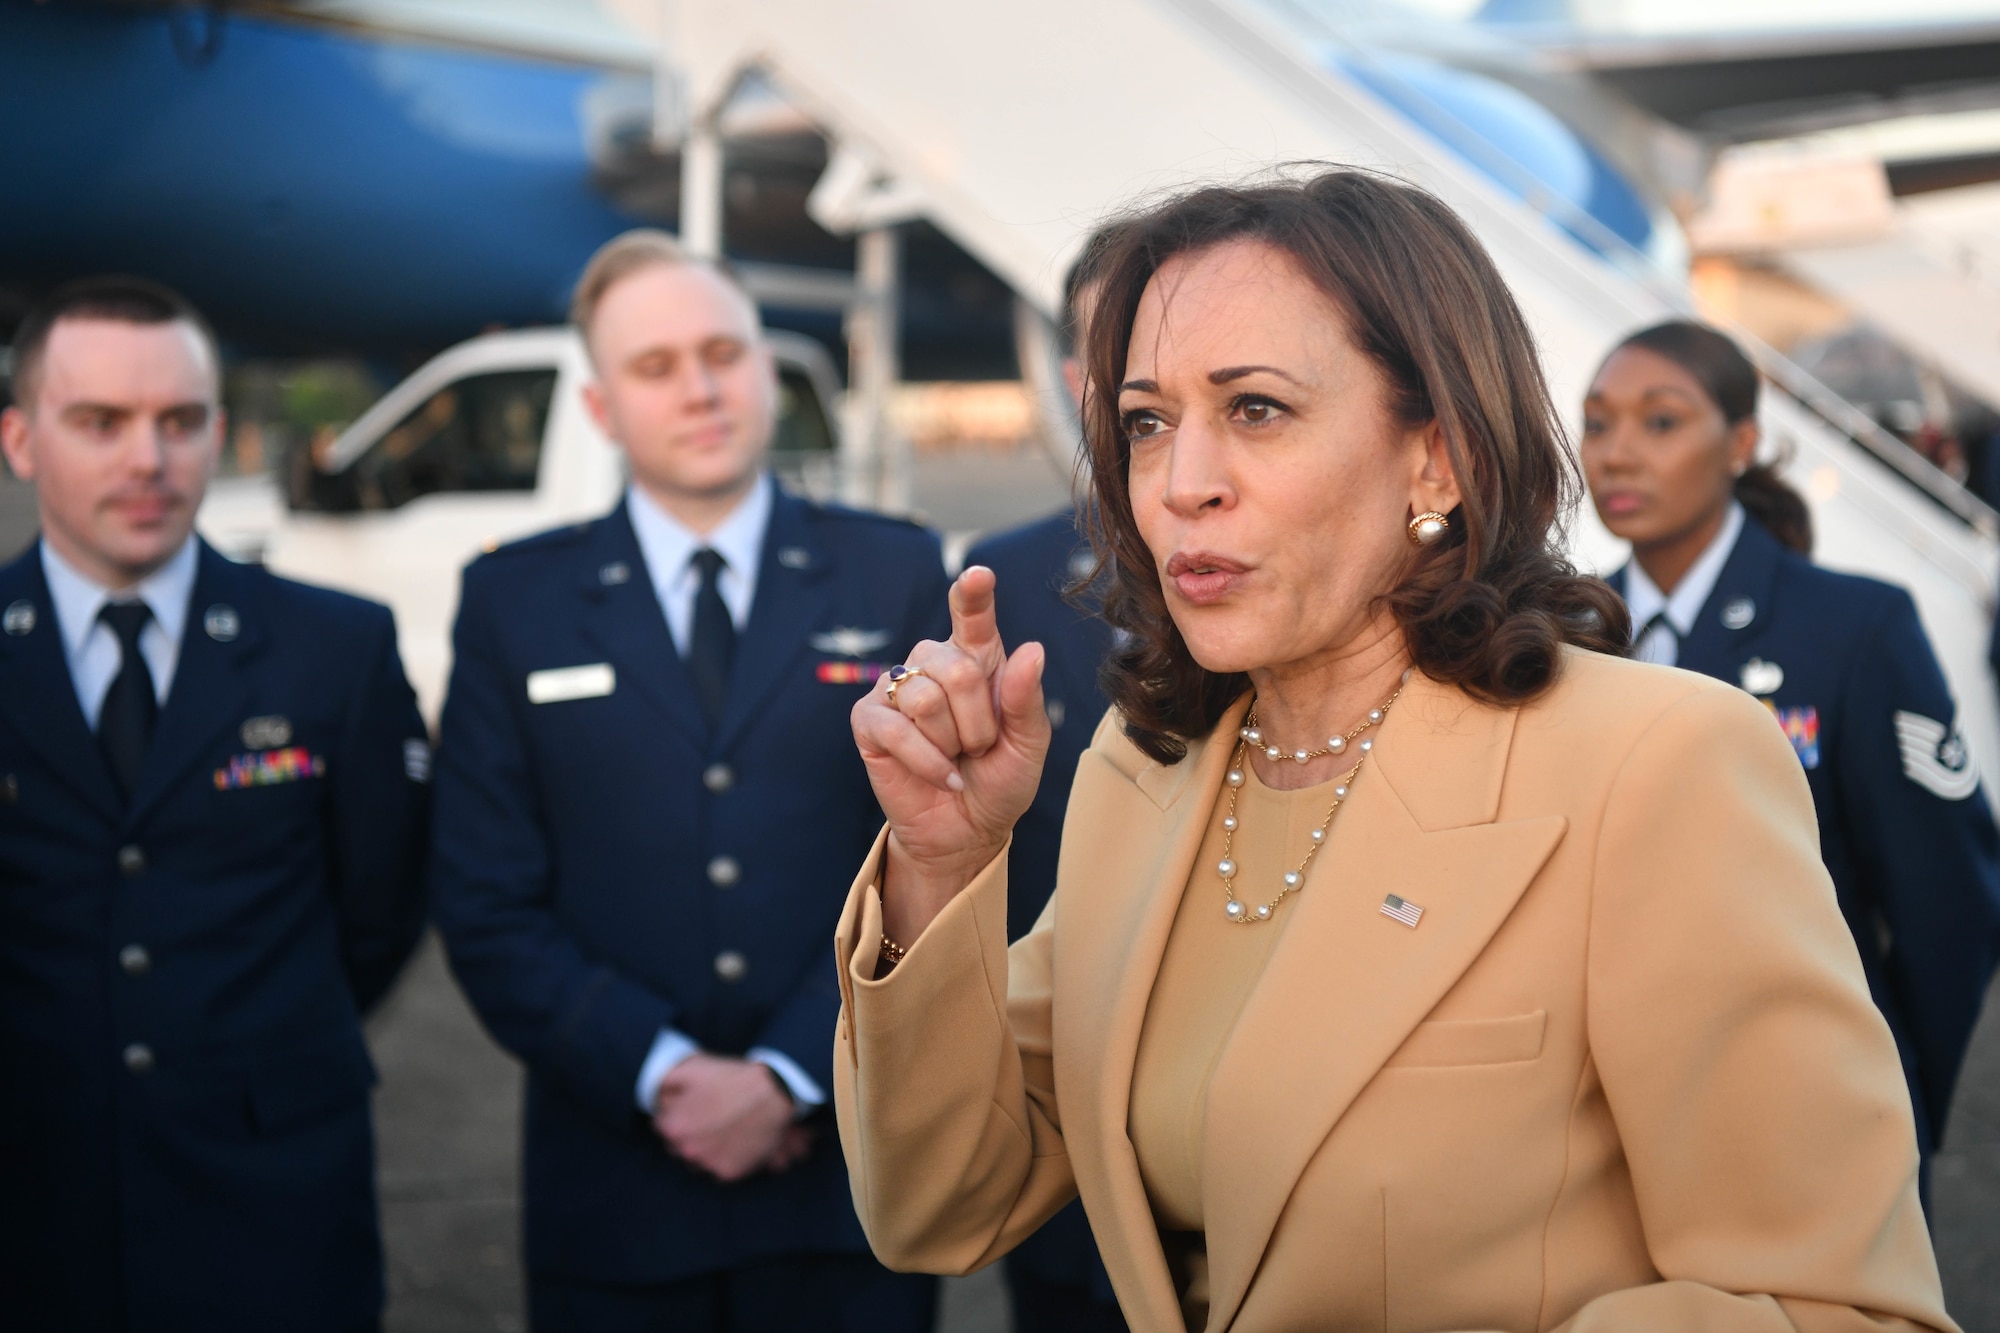 Vice President Kamala Harris speaks with Airmen prior to departing from Maxwell Air Force Base, Alabama, March 6, 2022. Harris recognized 10 individuals who were nominated as exemplary Airmen. (U.S. Air Force photo by Senior Airman Jackson Manske)